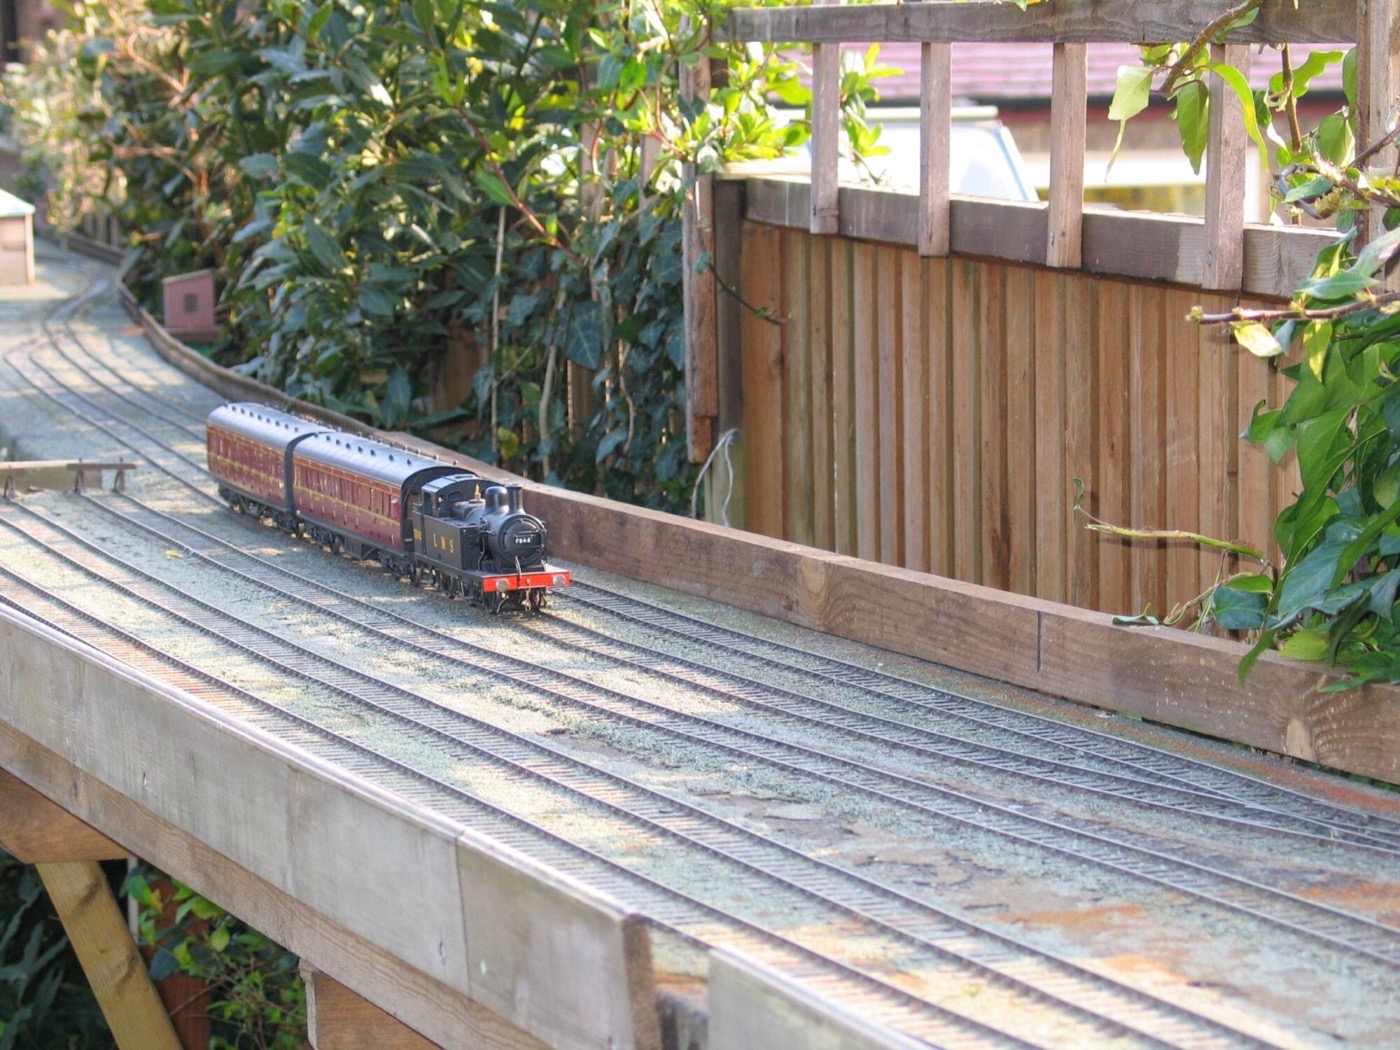 Jinty on the garden layout